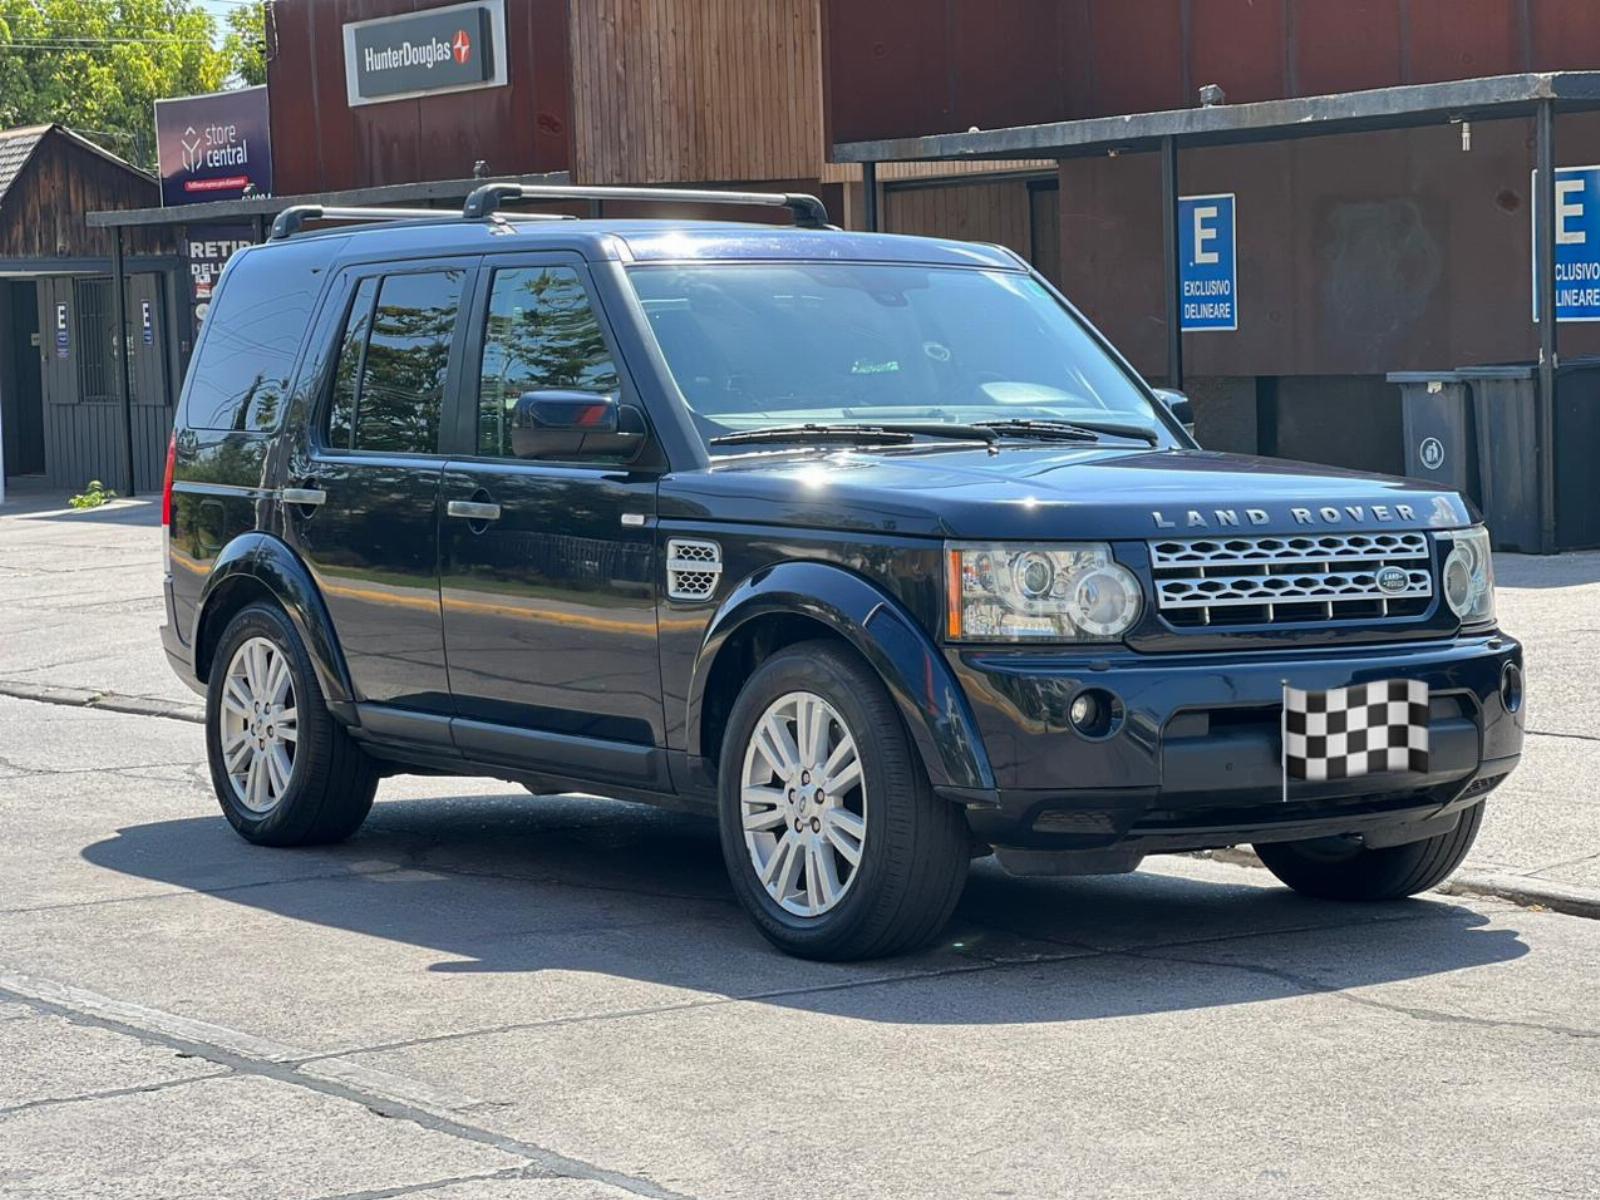 LAND ROVER DISCOVERY DISCOVERY IV 3.0 DIESEL HSE 2012 DISCOVERY IV 3.0 DIESEL HSE 3 CORRIDAS - FULL MOTOR